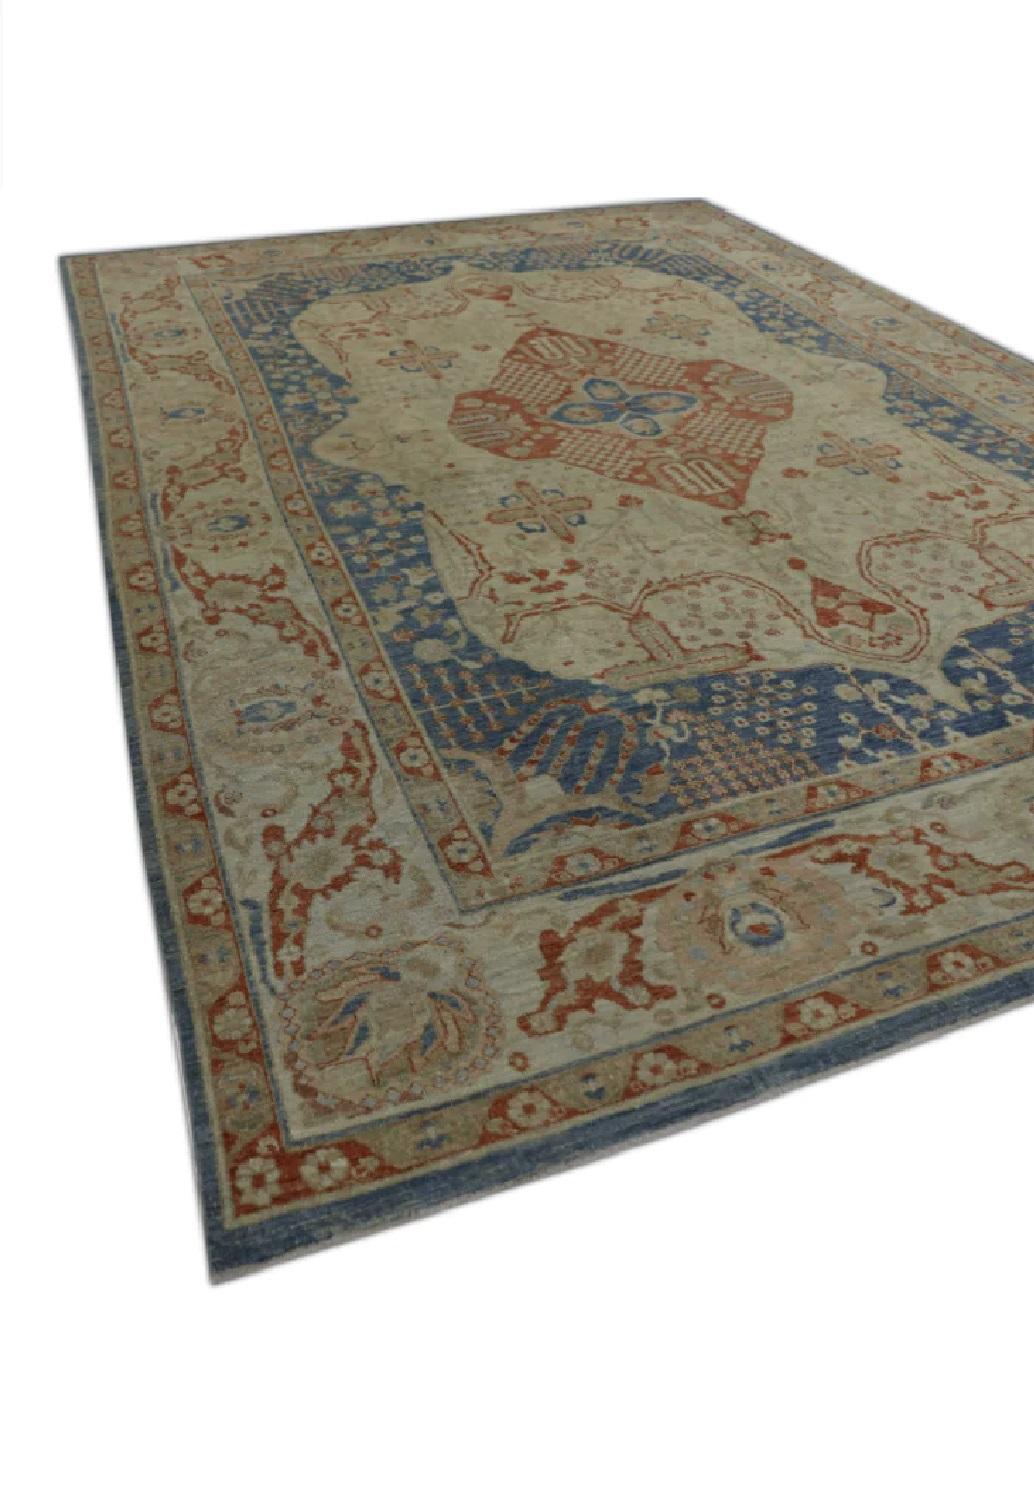 This modern finewoven Turkish Oushak rug is a stunning piece of art that has been handwoven using traditional techniques by skilled artisans. The rug features intricate patterns and a soft color palette that is achieved through the use of natural